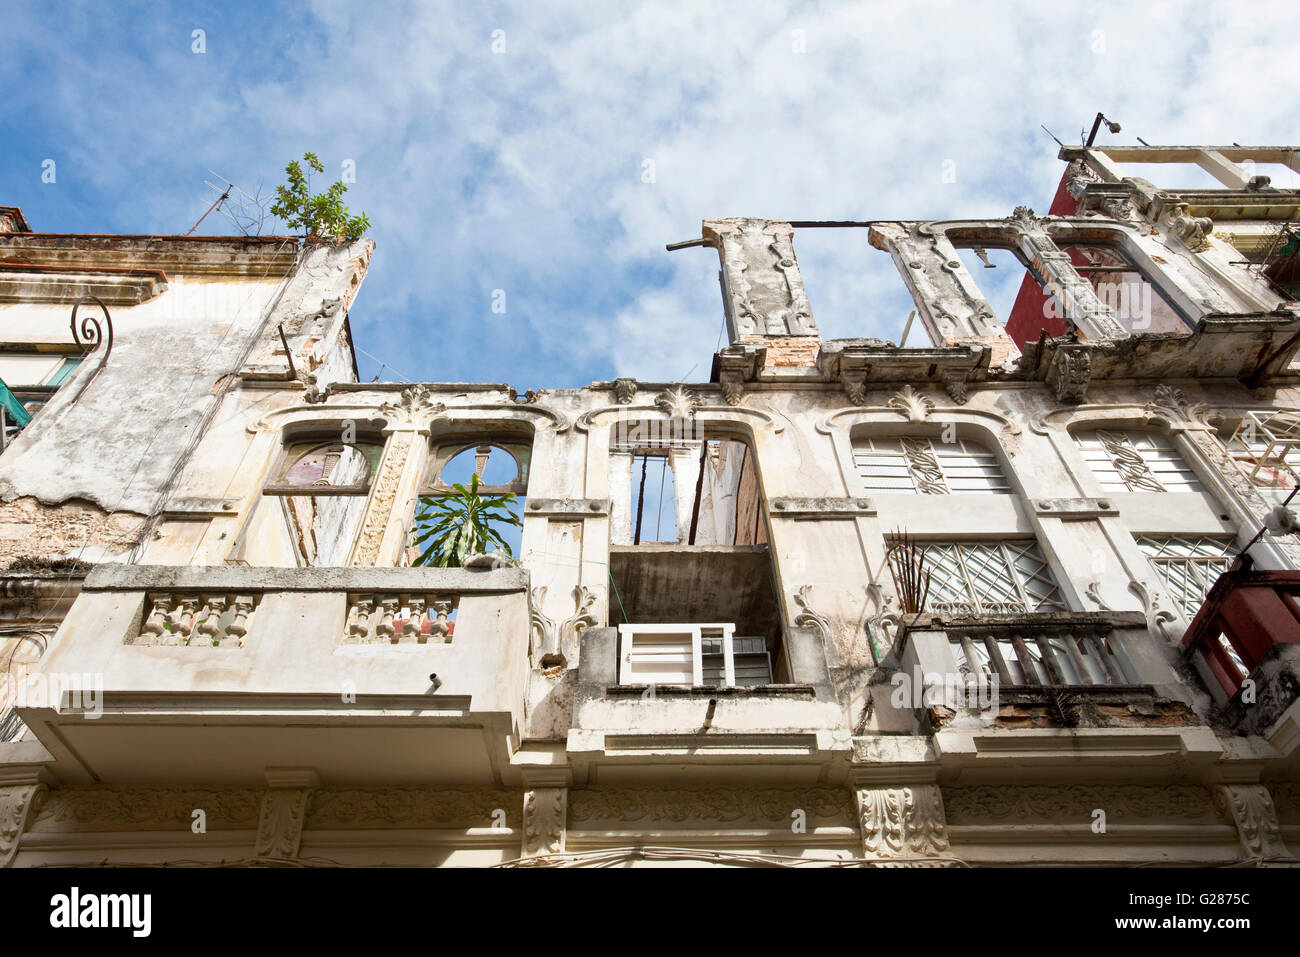 A view in the Old Town of Havana showing one of the run down colonial buildings. Stock Photo